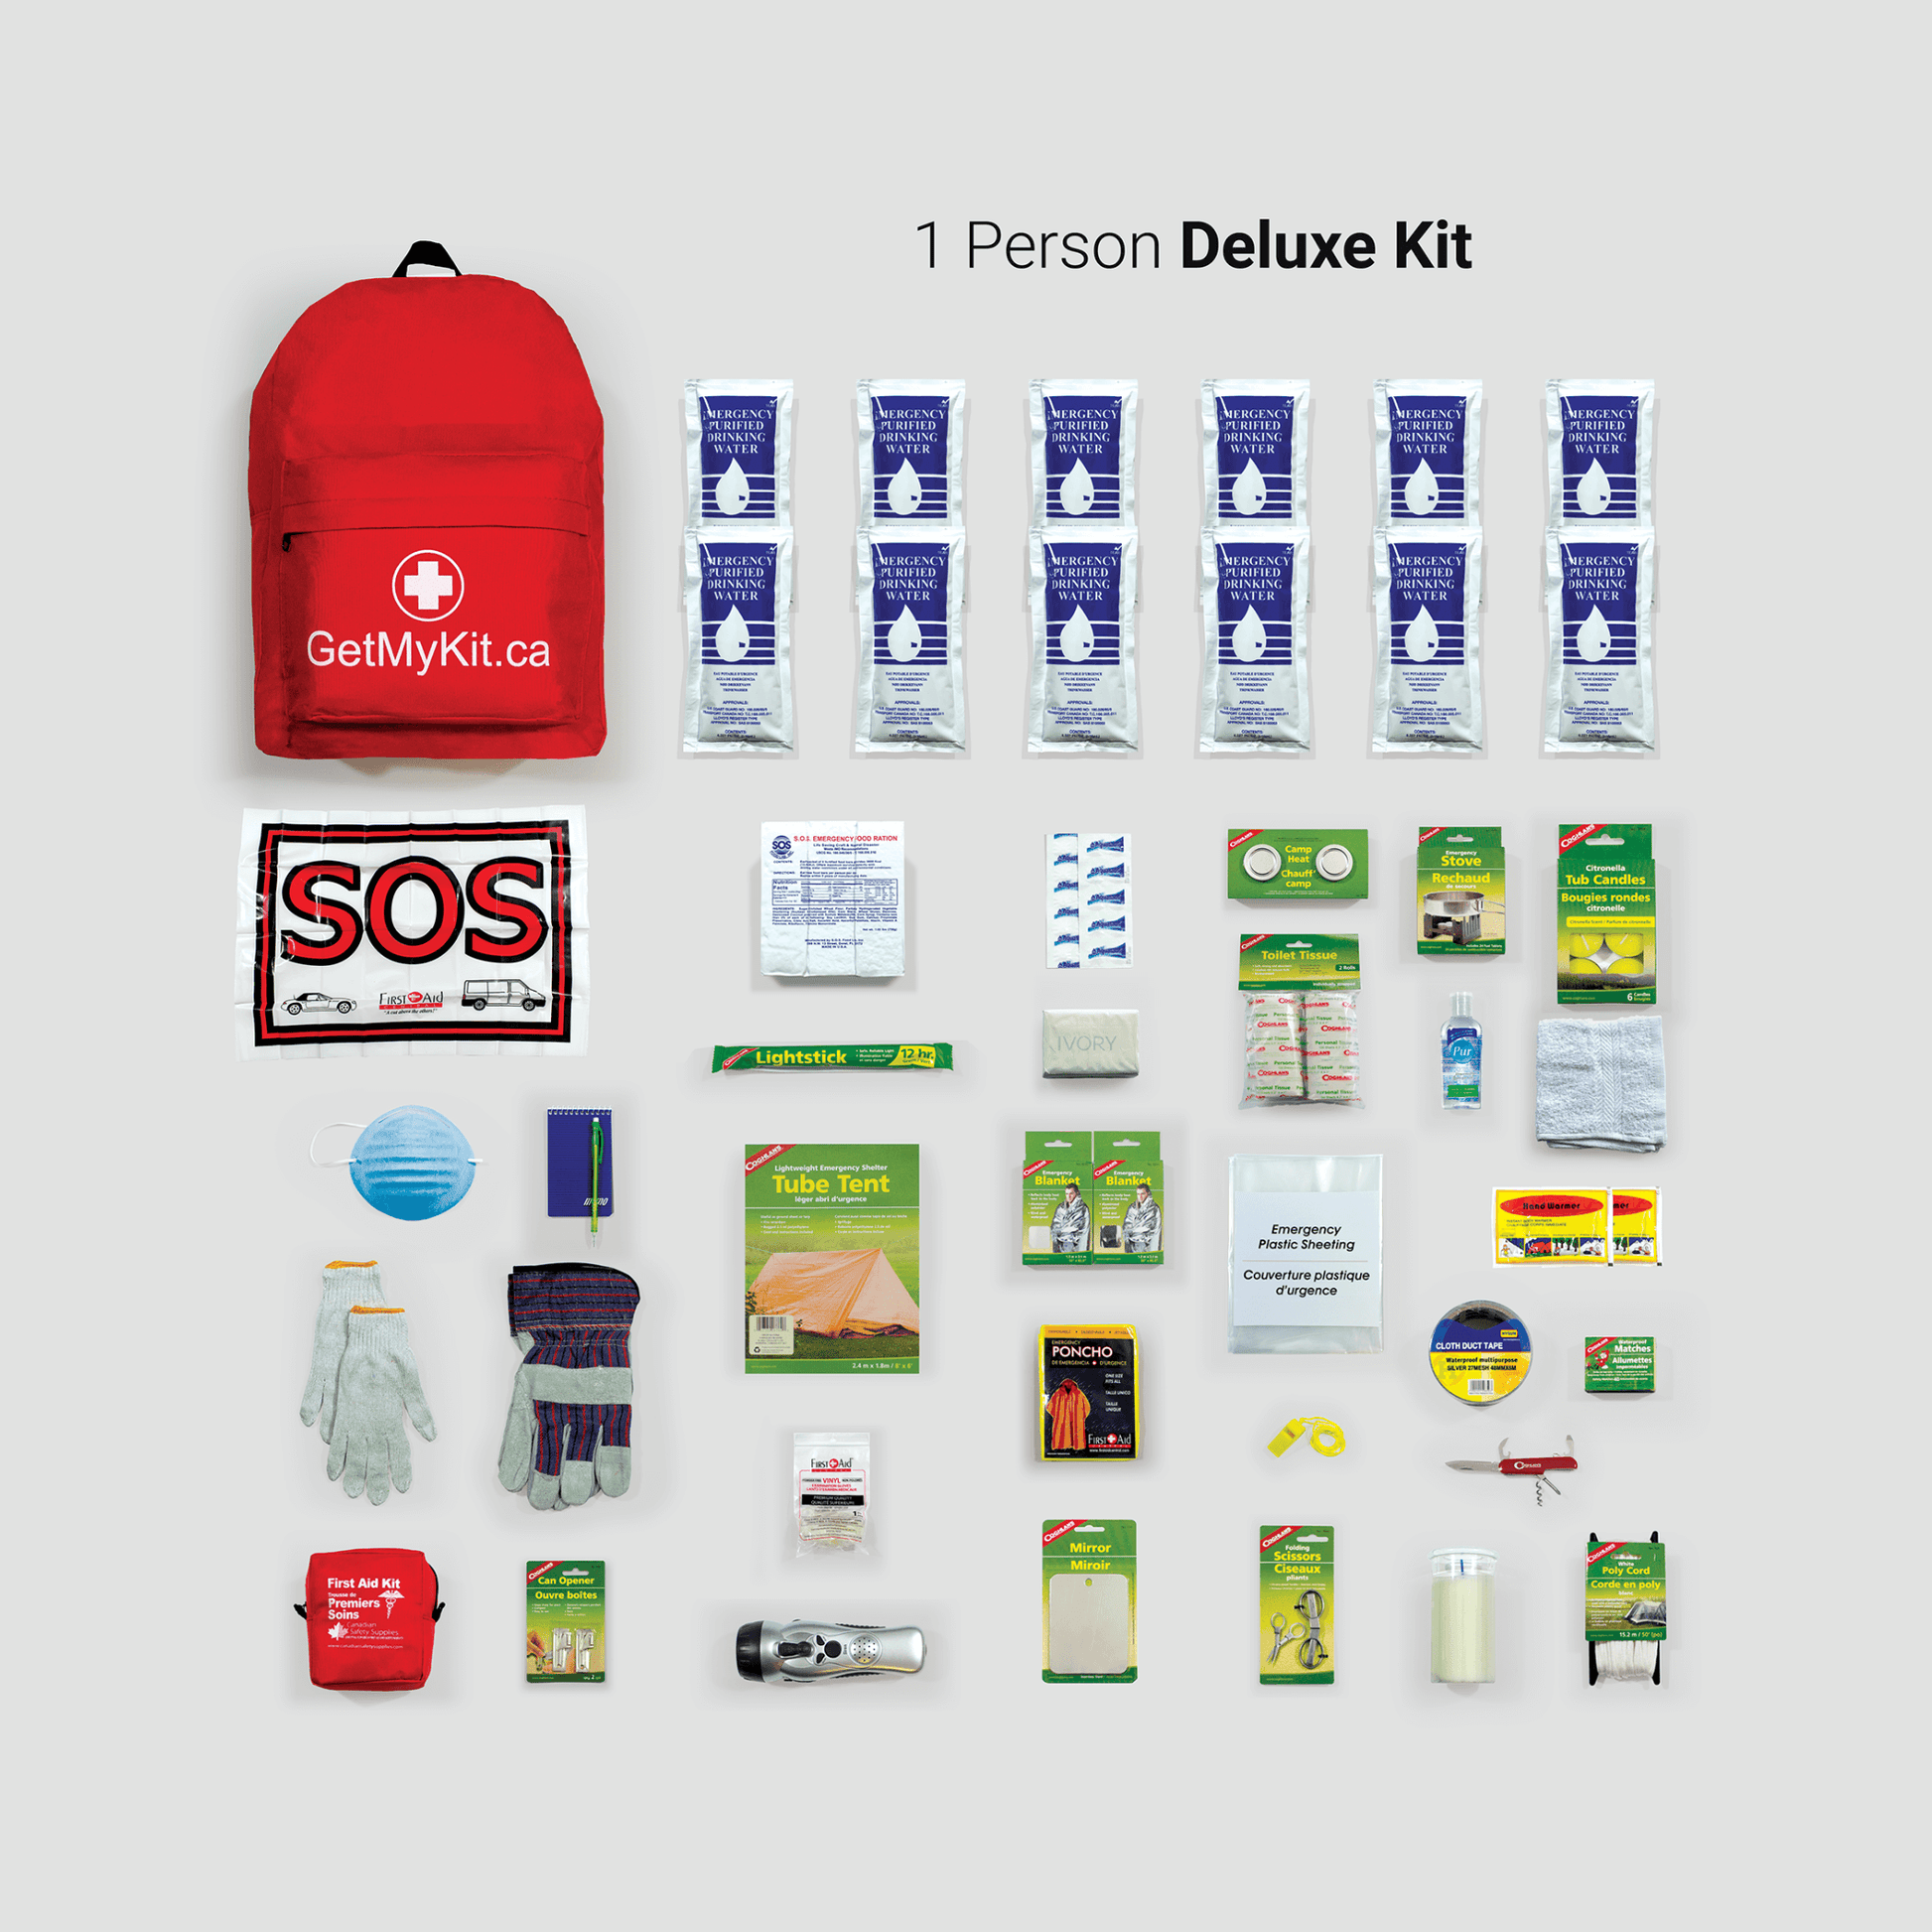 A one person deluxe emergency kit and its contents.